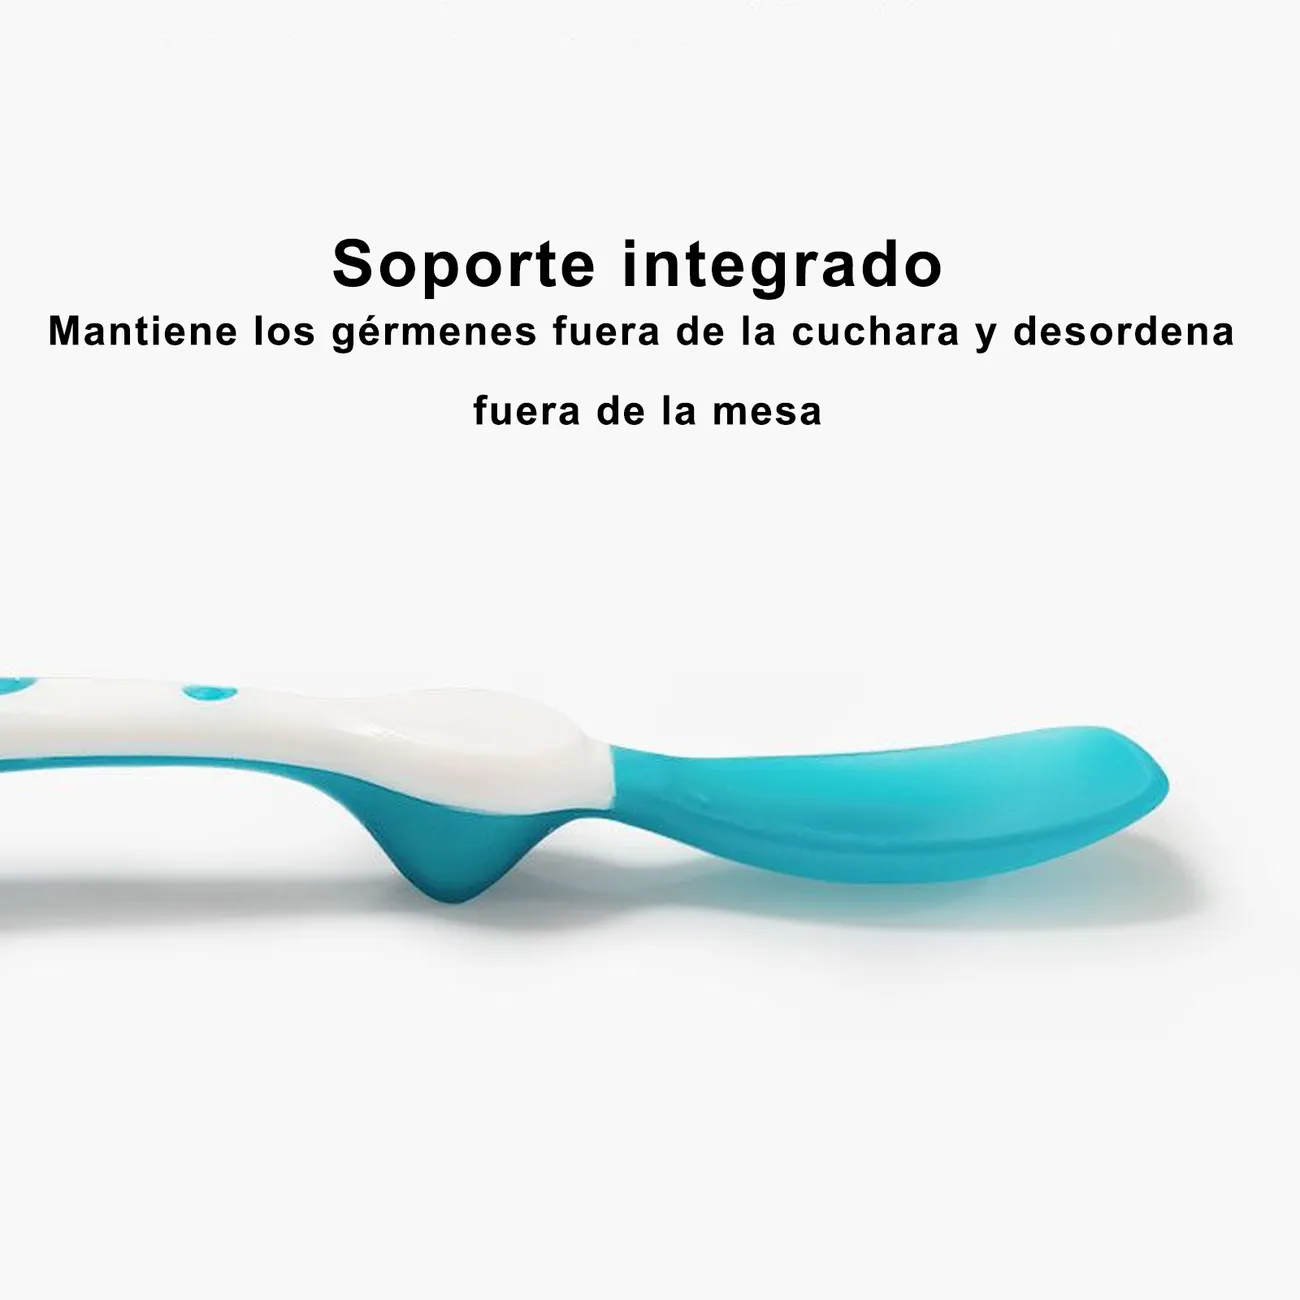 Color-changing Long-handled Soft Spoon for Kids Turquoise big image 1